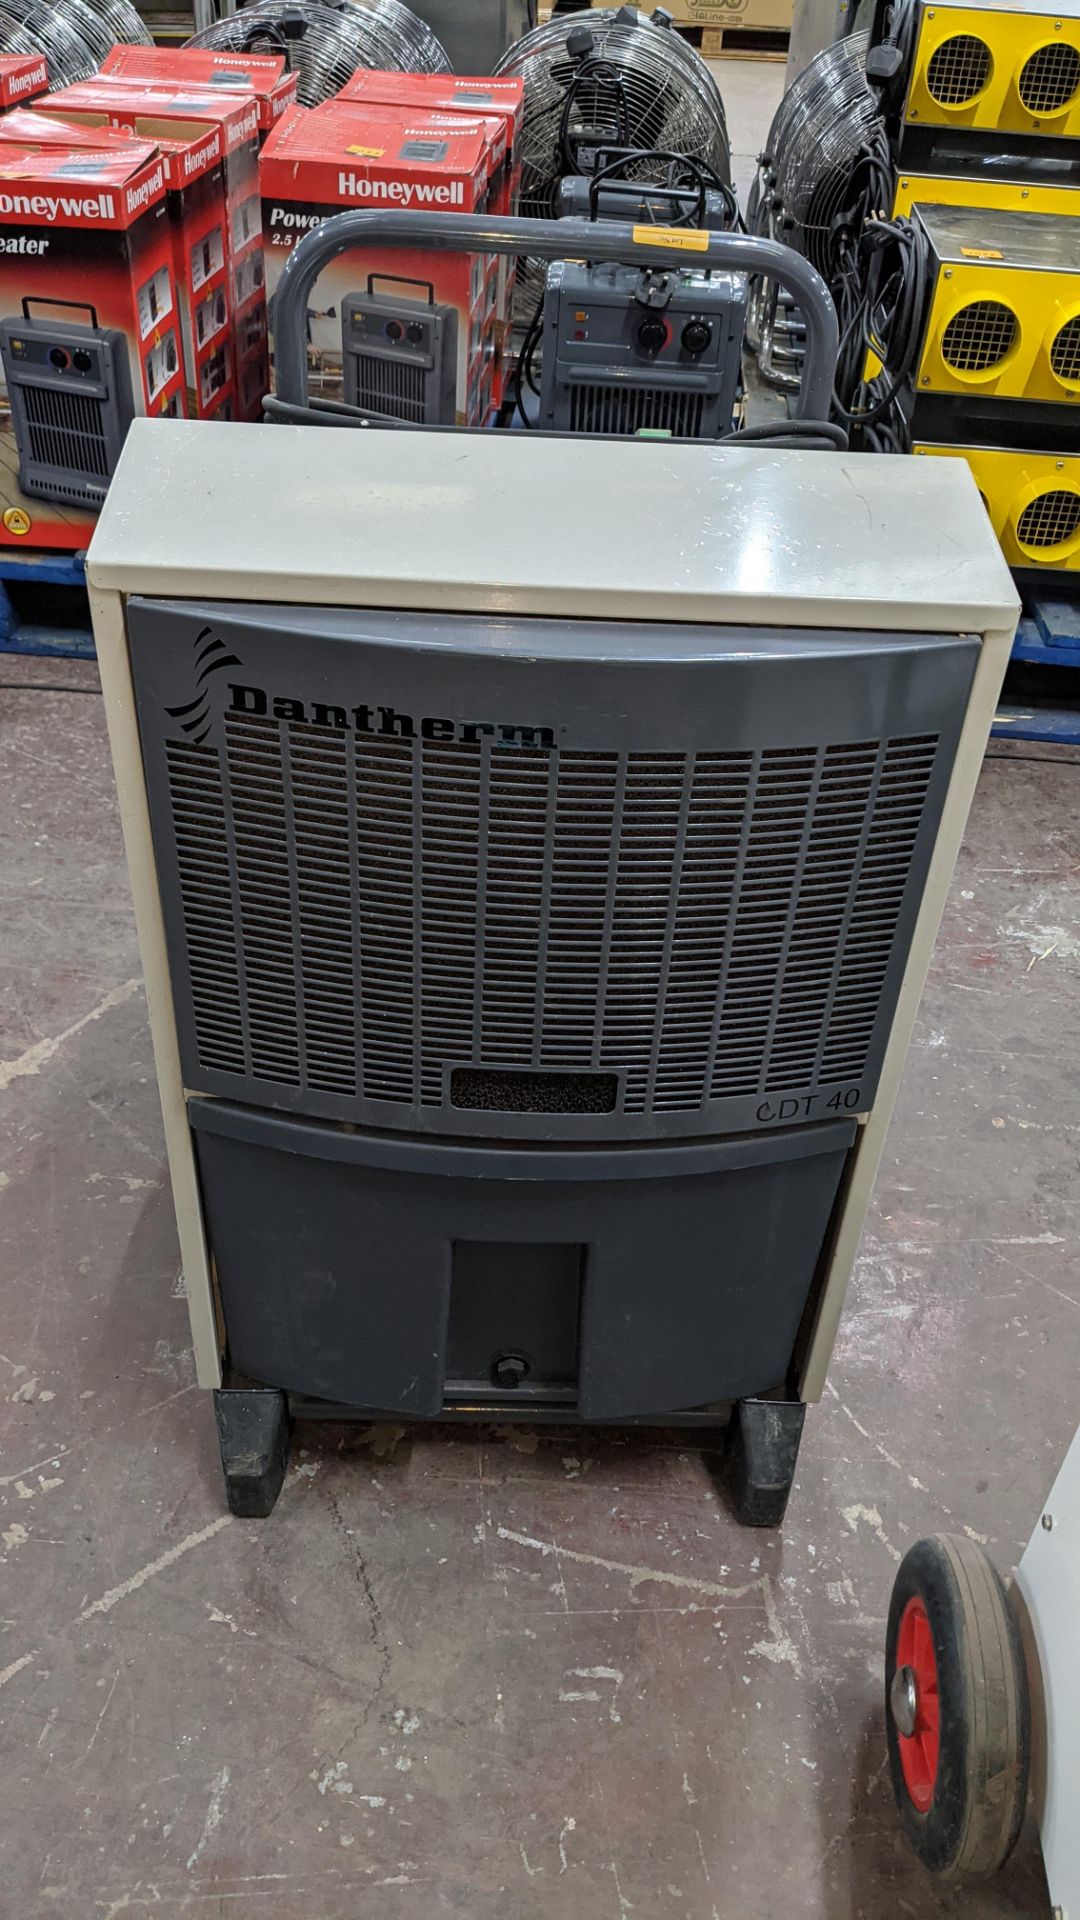 Dantherm model CDT40 dehumidifier. 9,888 recorded hours